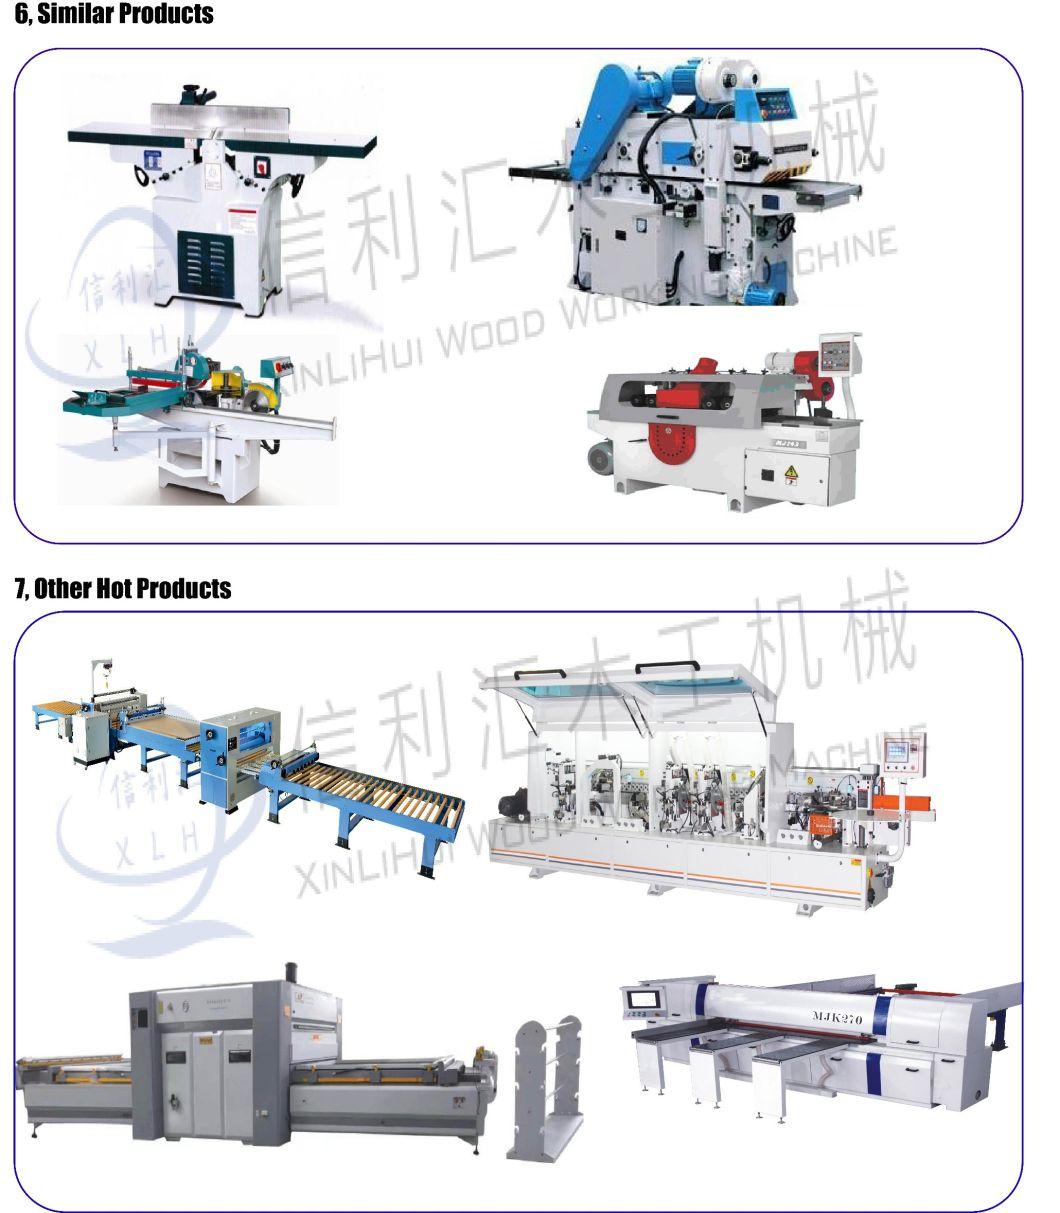 Straight Line Woodworking Multi Blade Rip Saw Timber Cutting Saw Machine for Wood Log Multi Blade Rip Saw Timber Cutting Multi Rip Saw